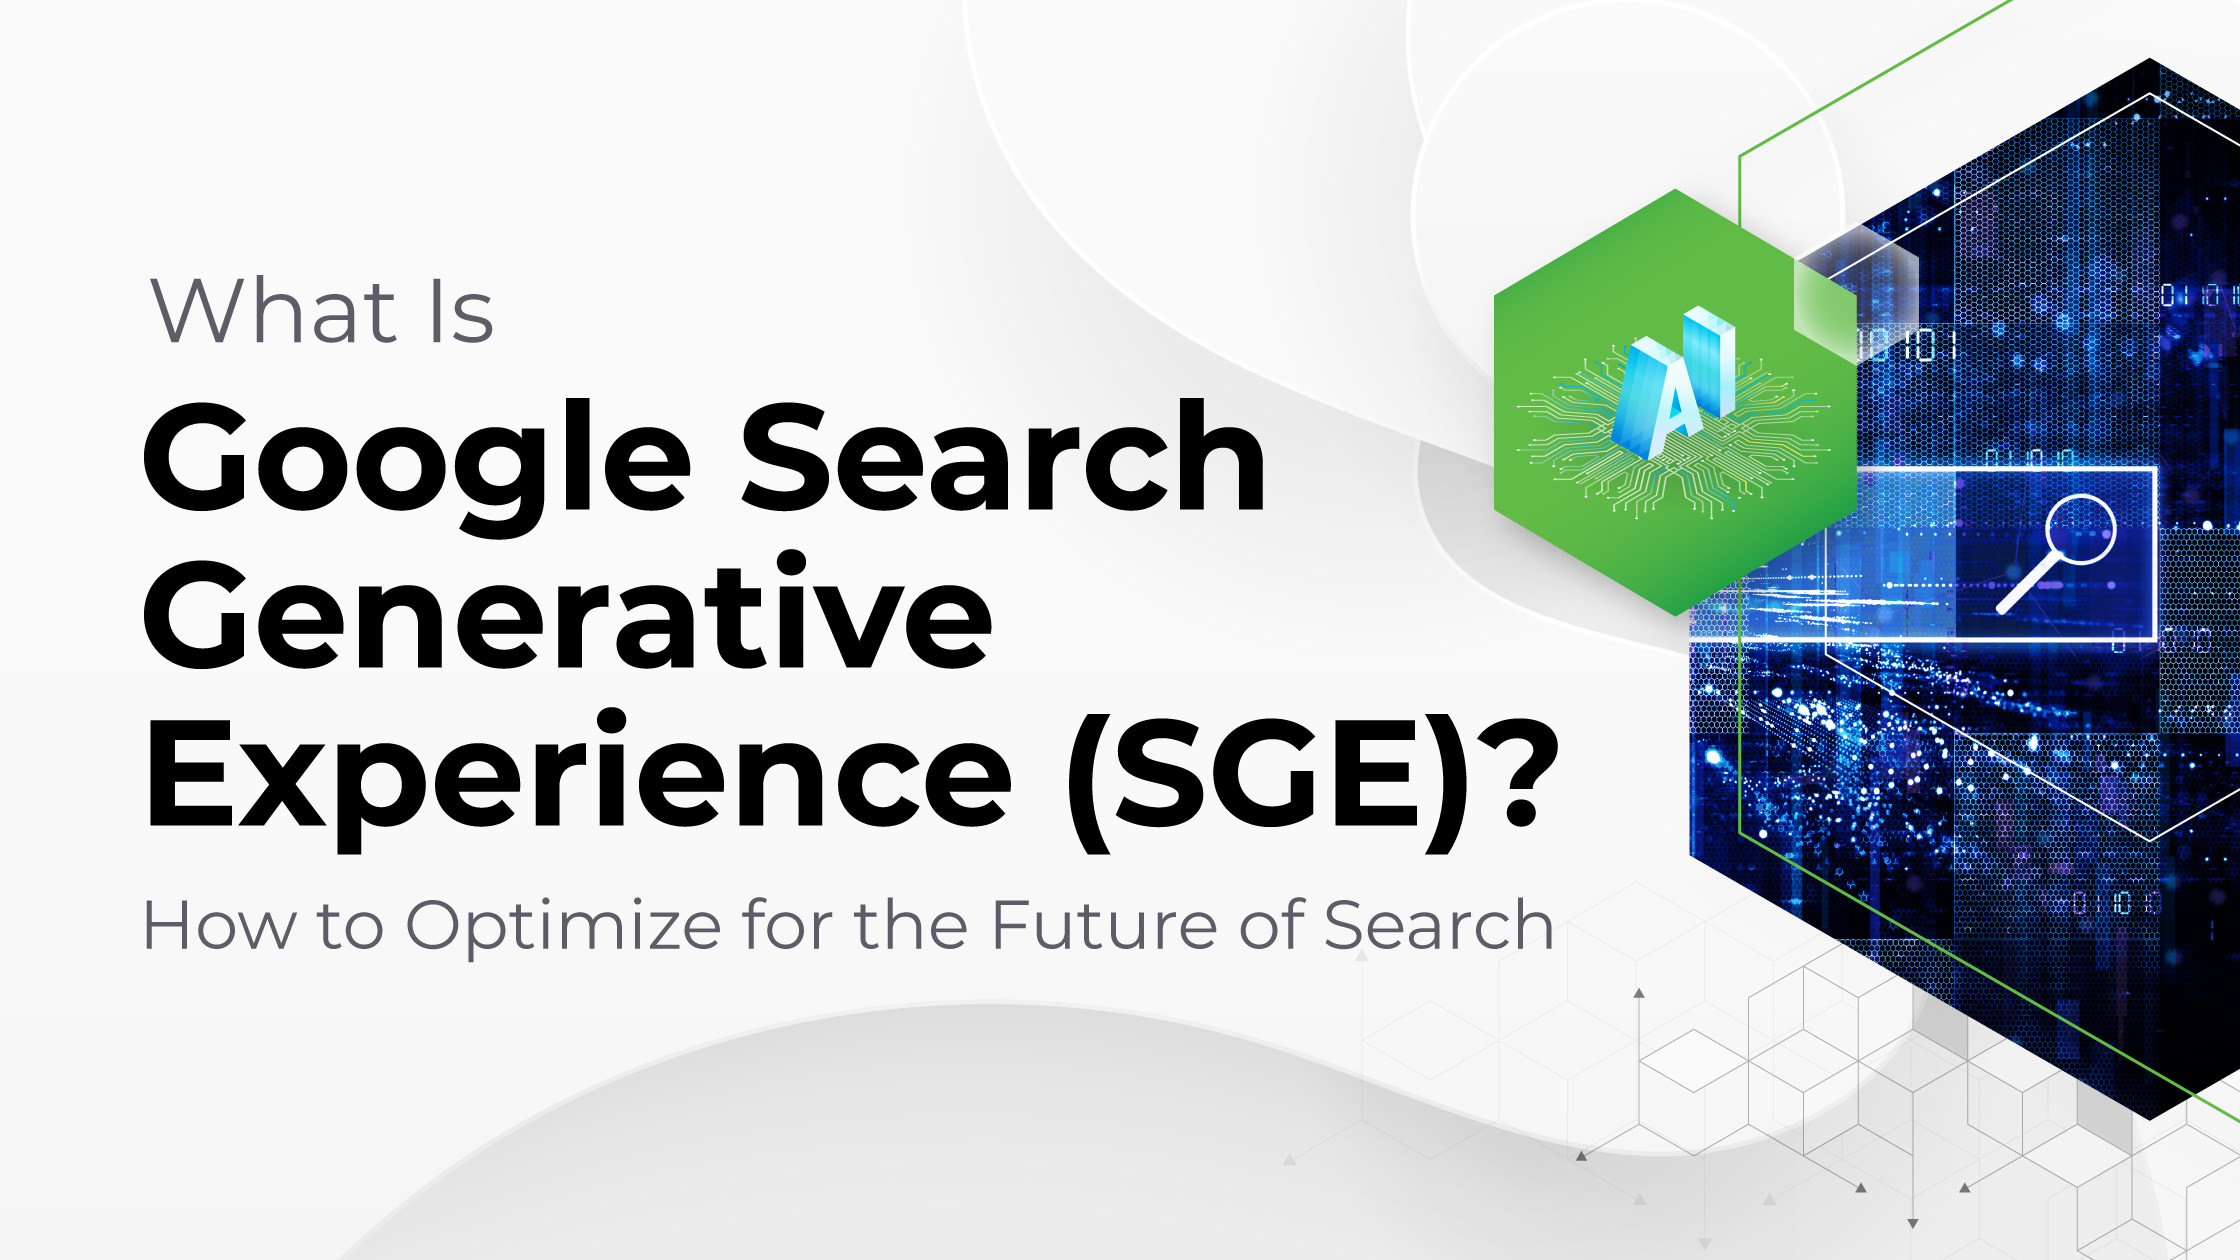 What is Google SGE? How to Optimize for the Future of Search